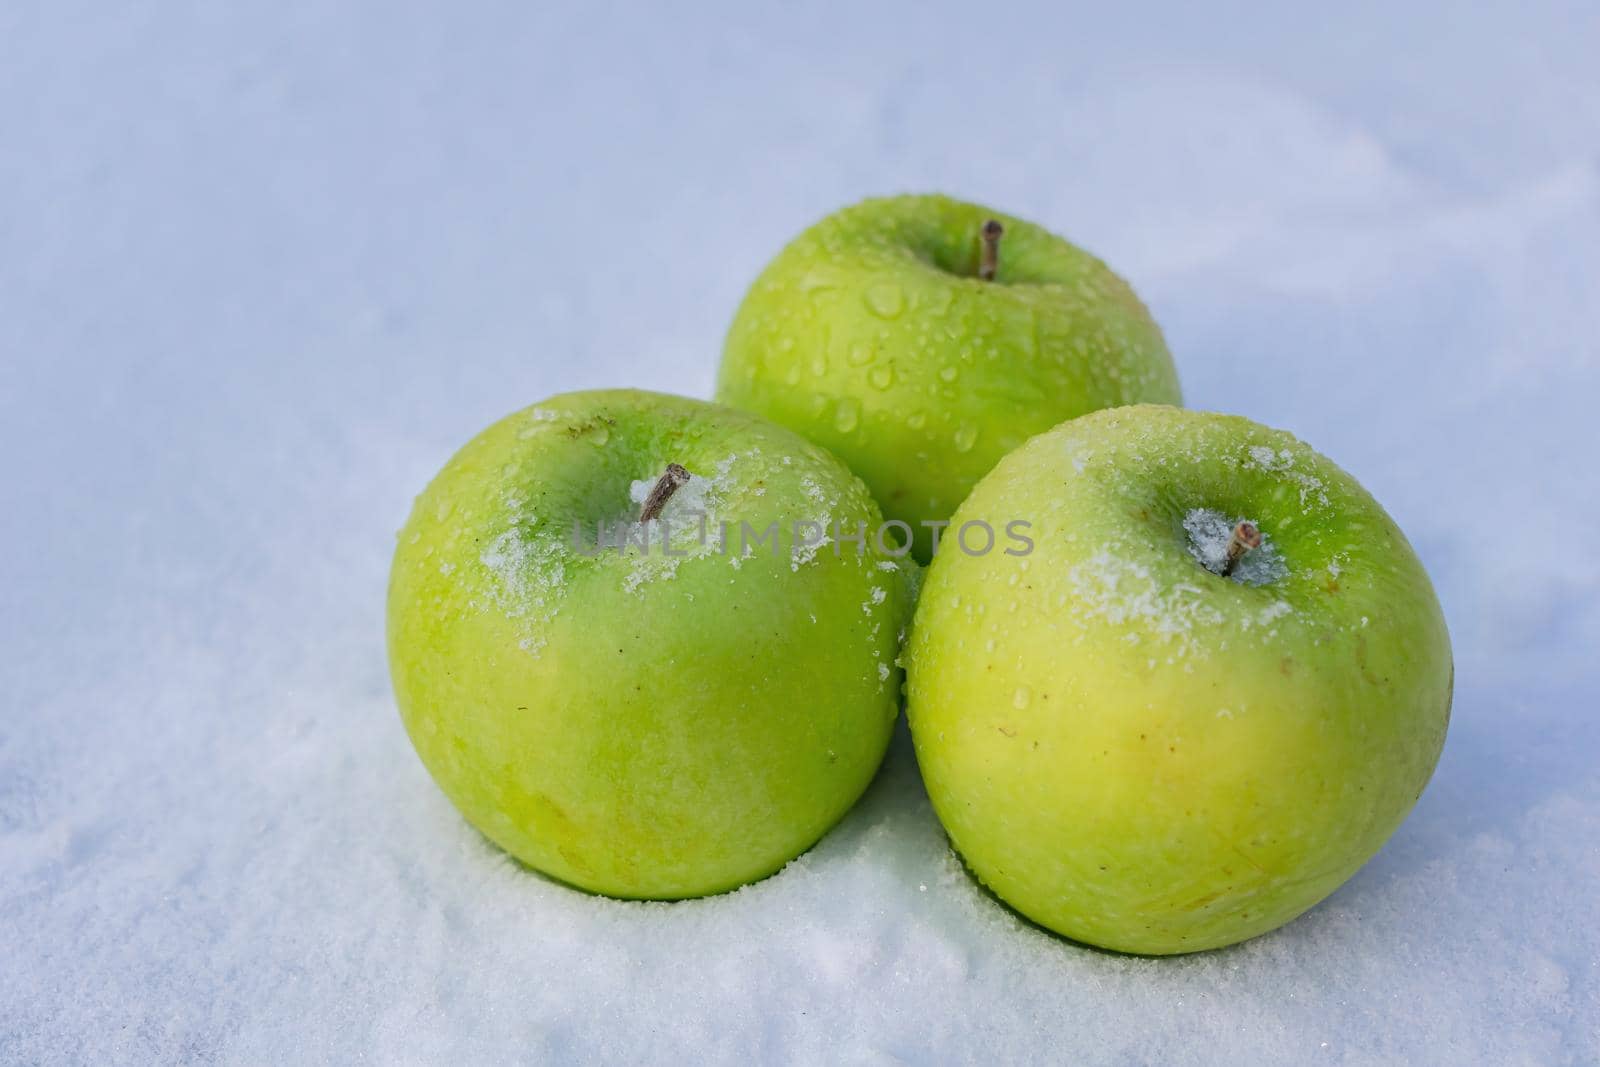 Freezing green apples on very cold snow by Skaron